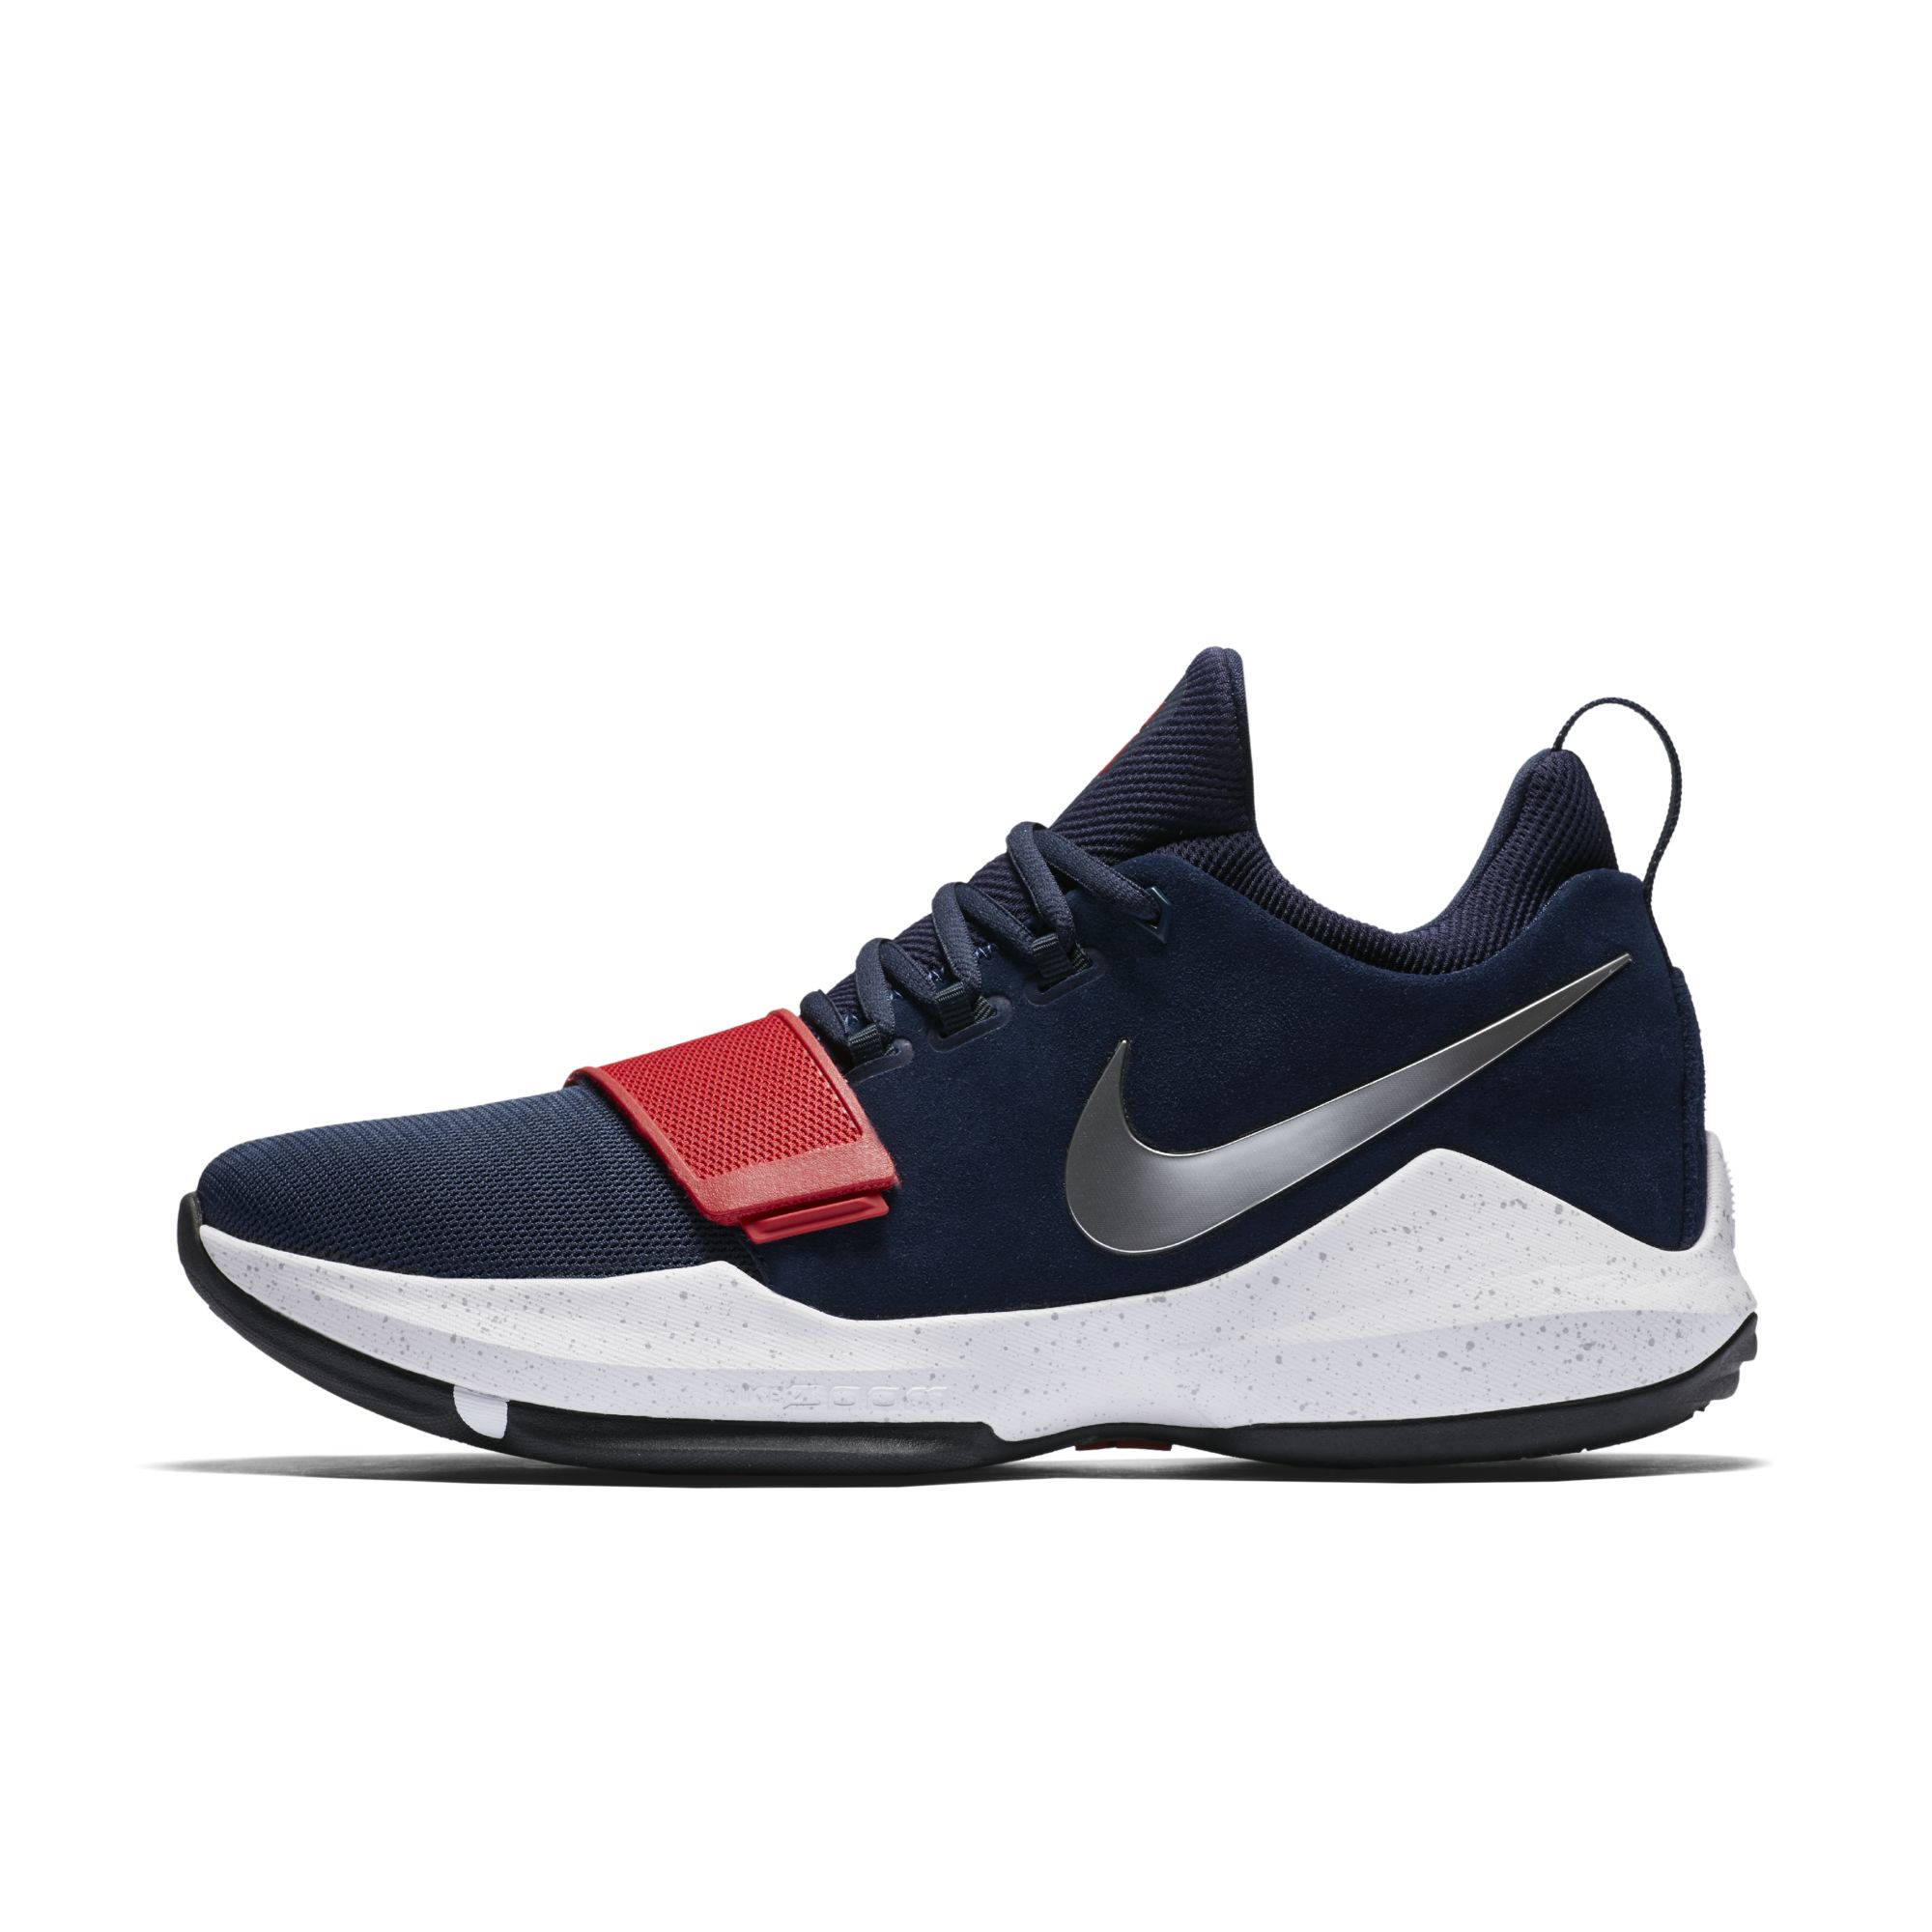 pg 1 usa colorway